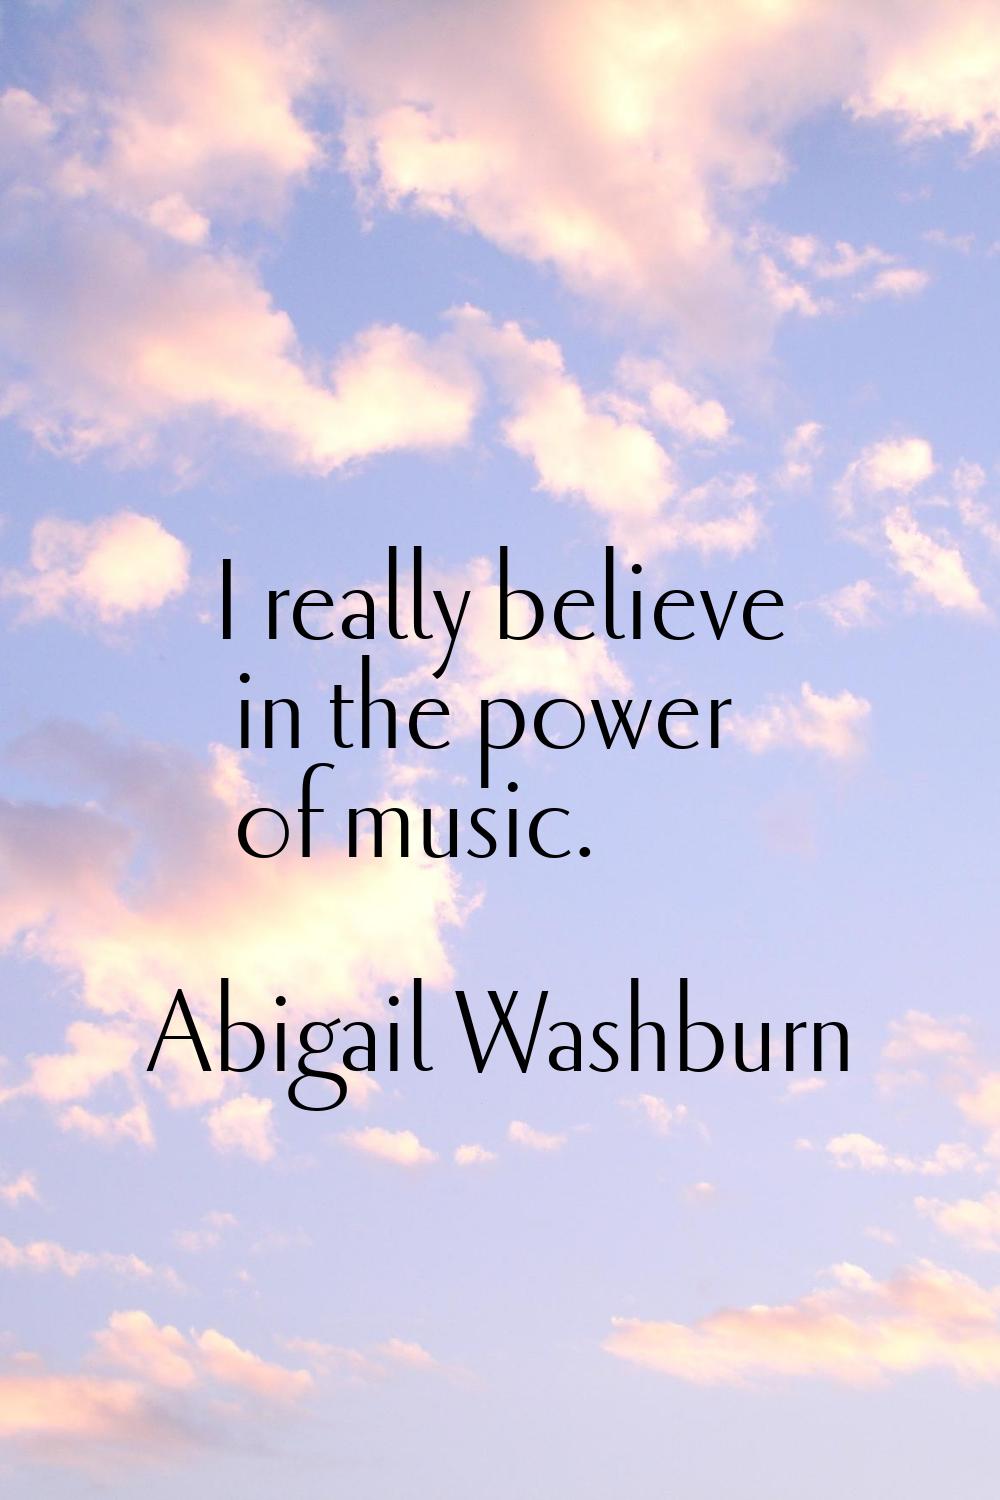 I really believe in the power of music.